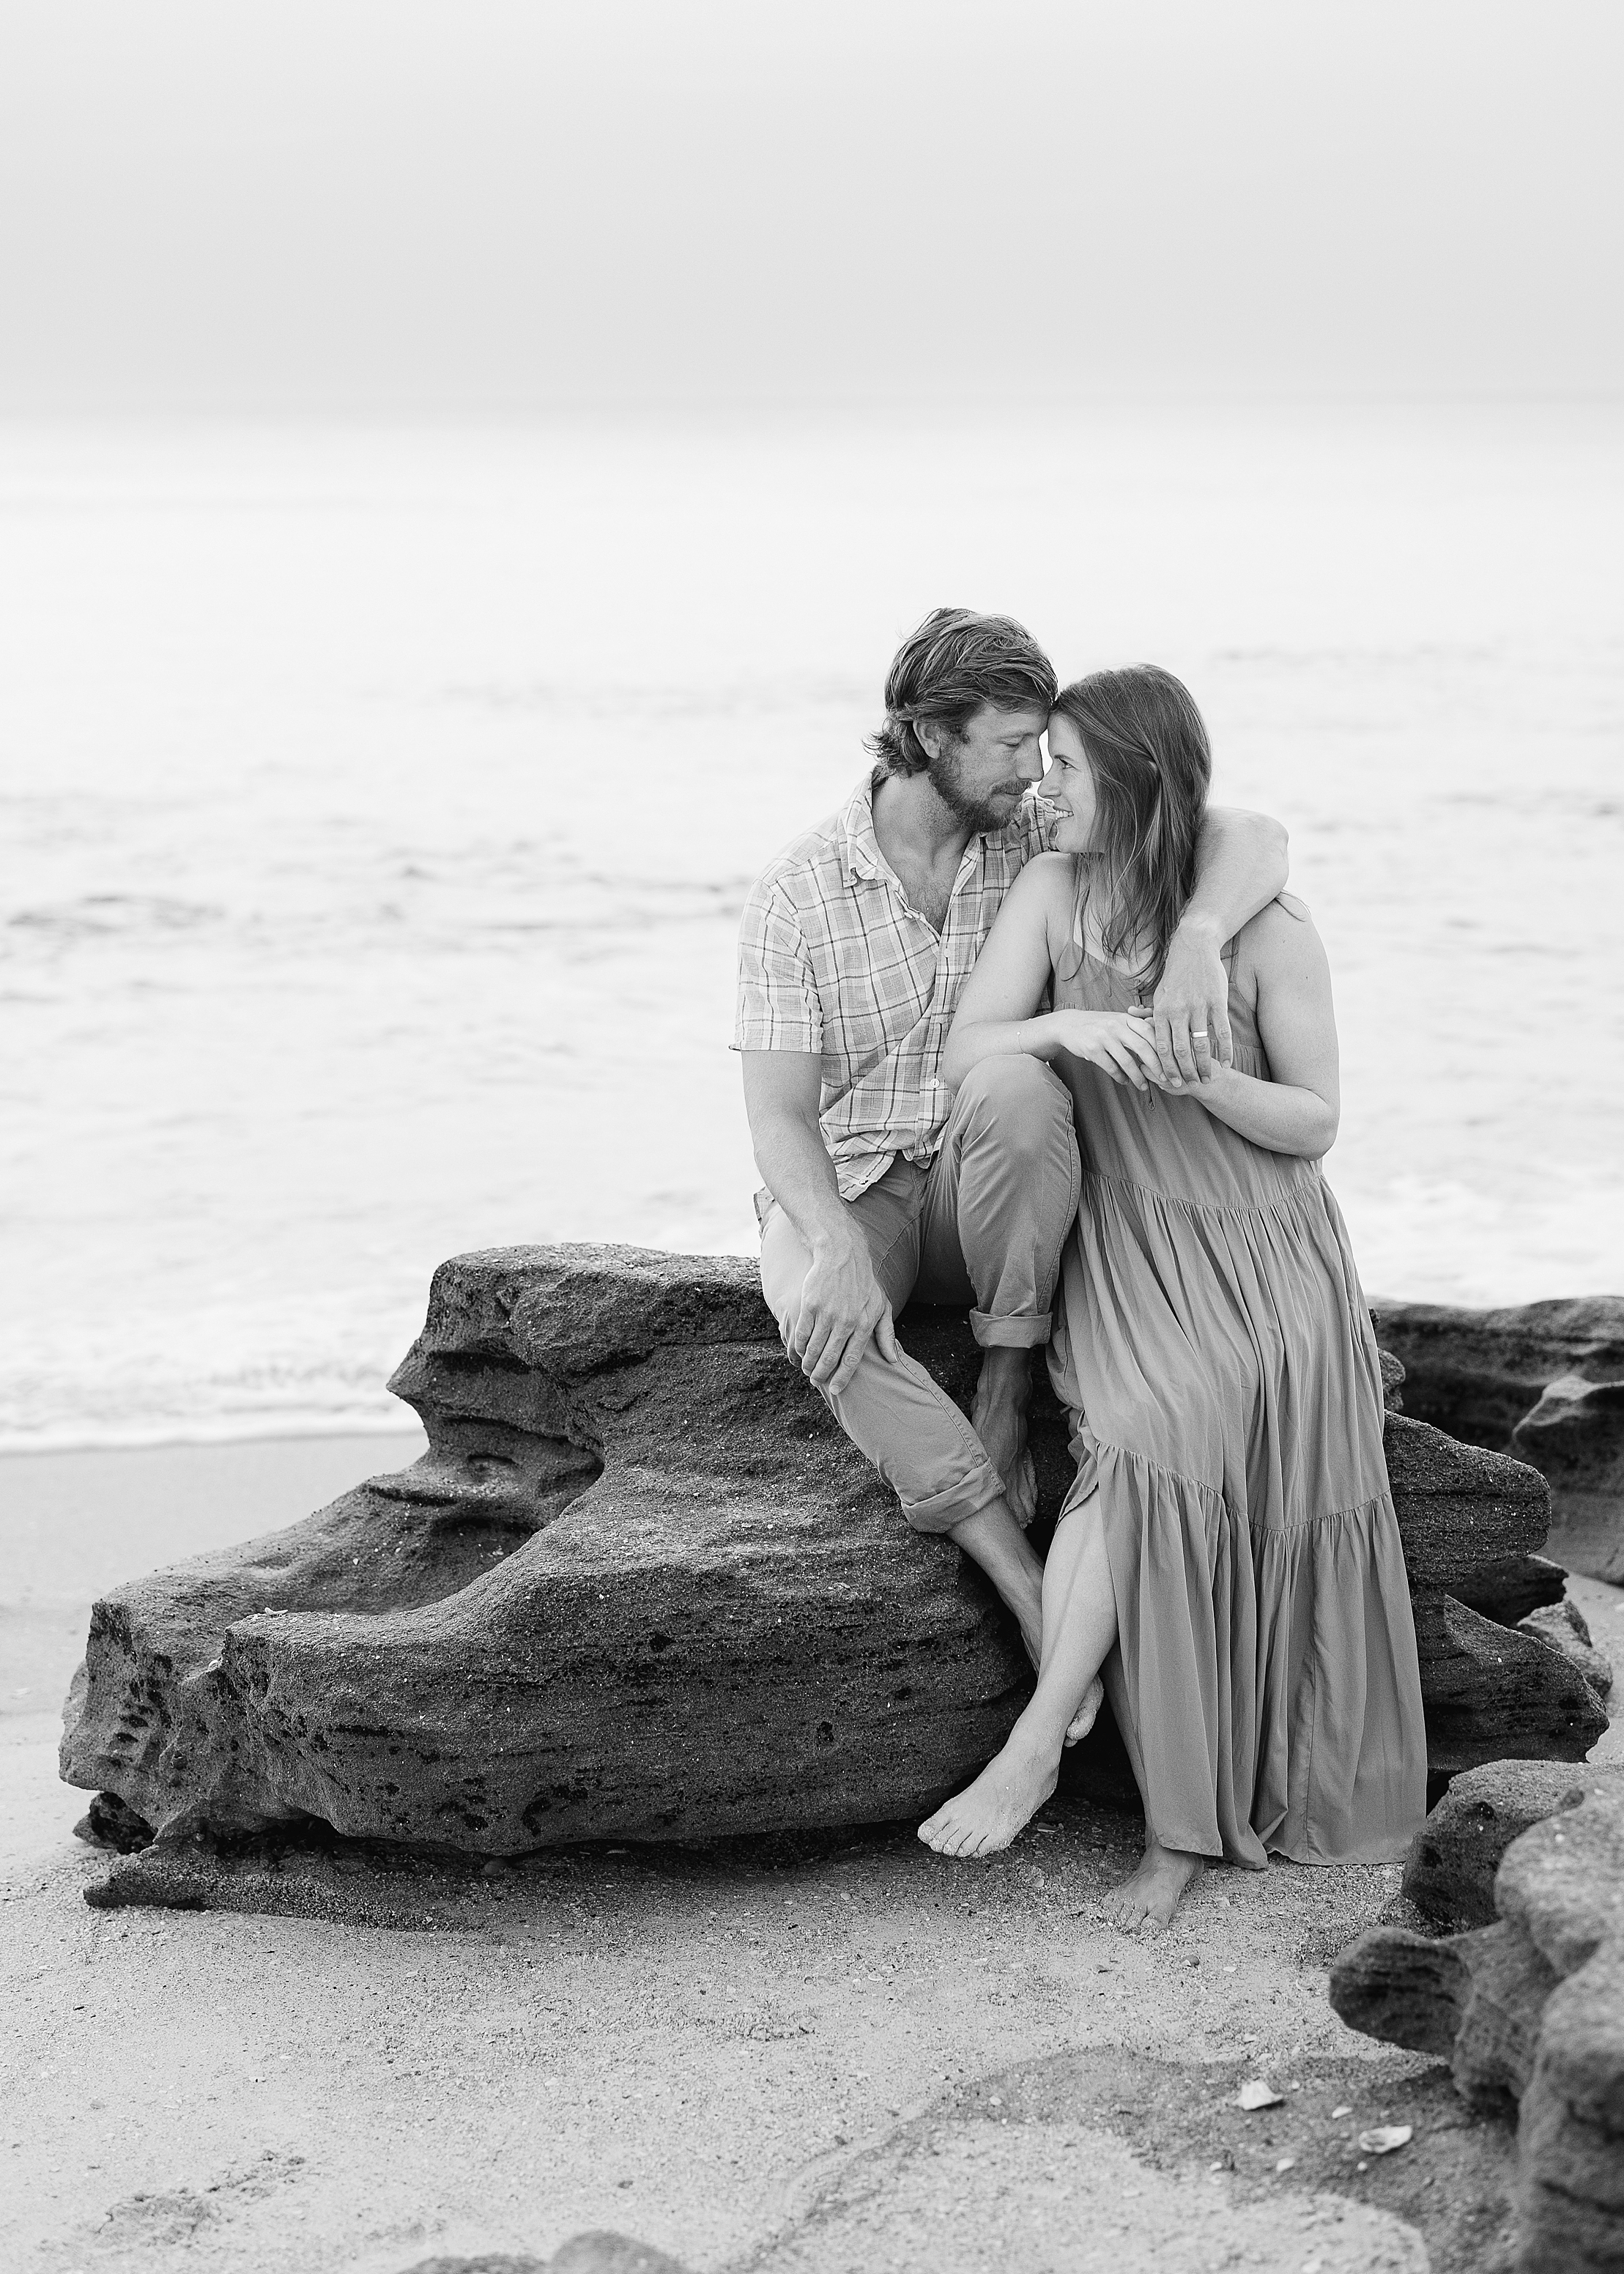 Black and white coastal portrait of man and woman in neutral colors.